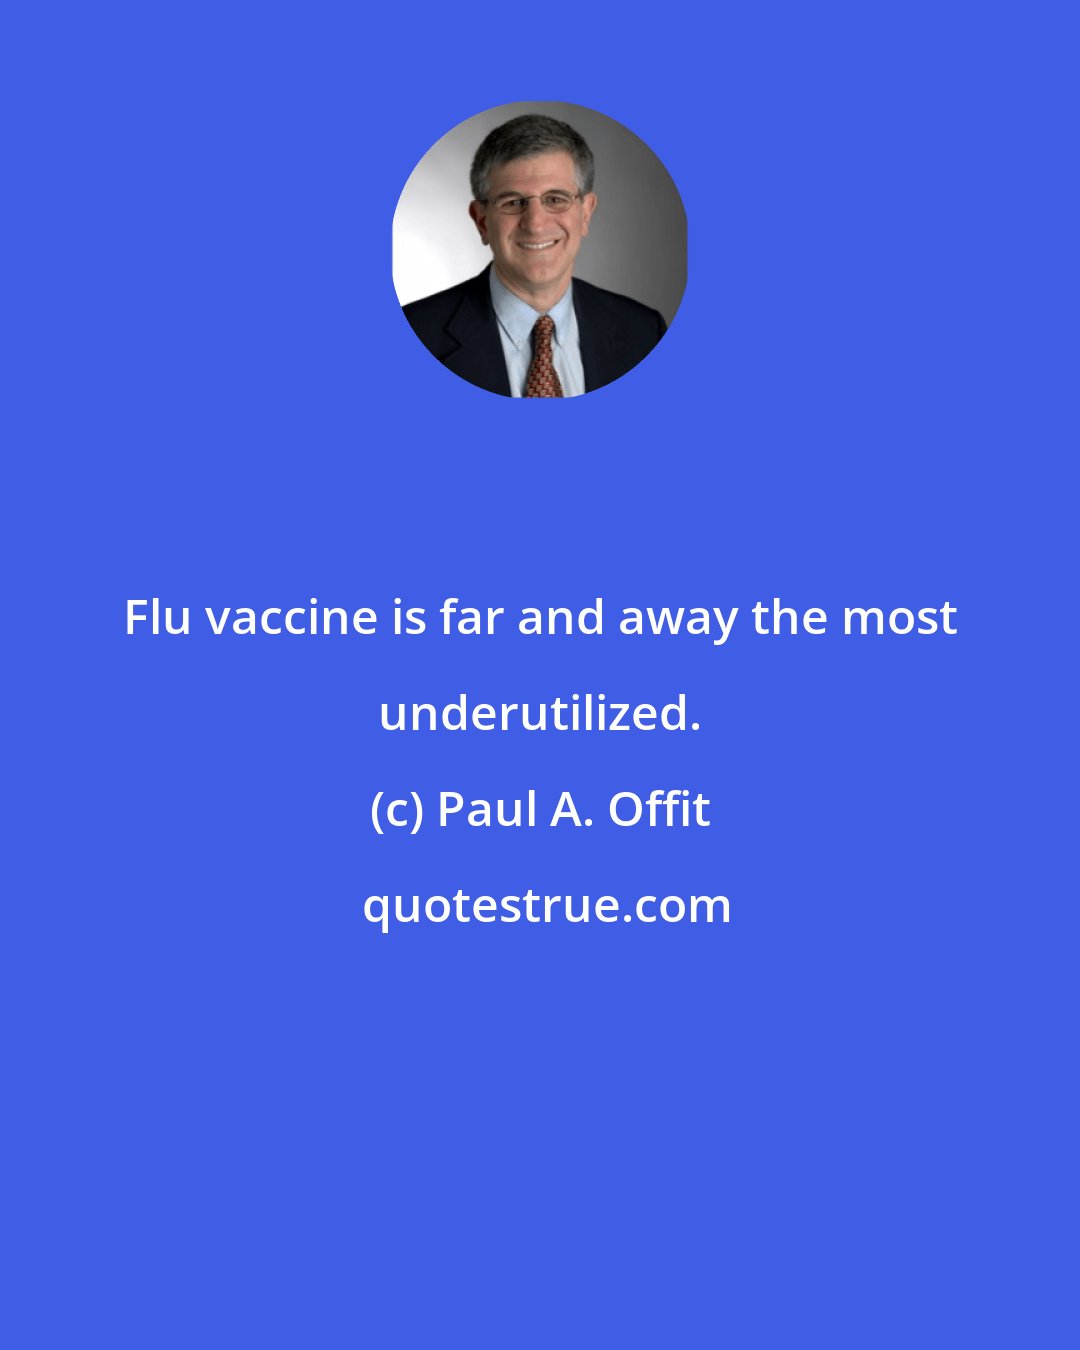 Paul A. Offit: Flu vaccine is far and away the most underutilized.